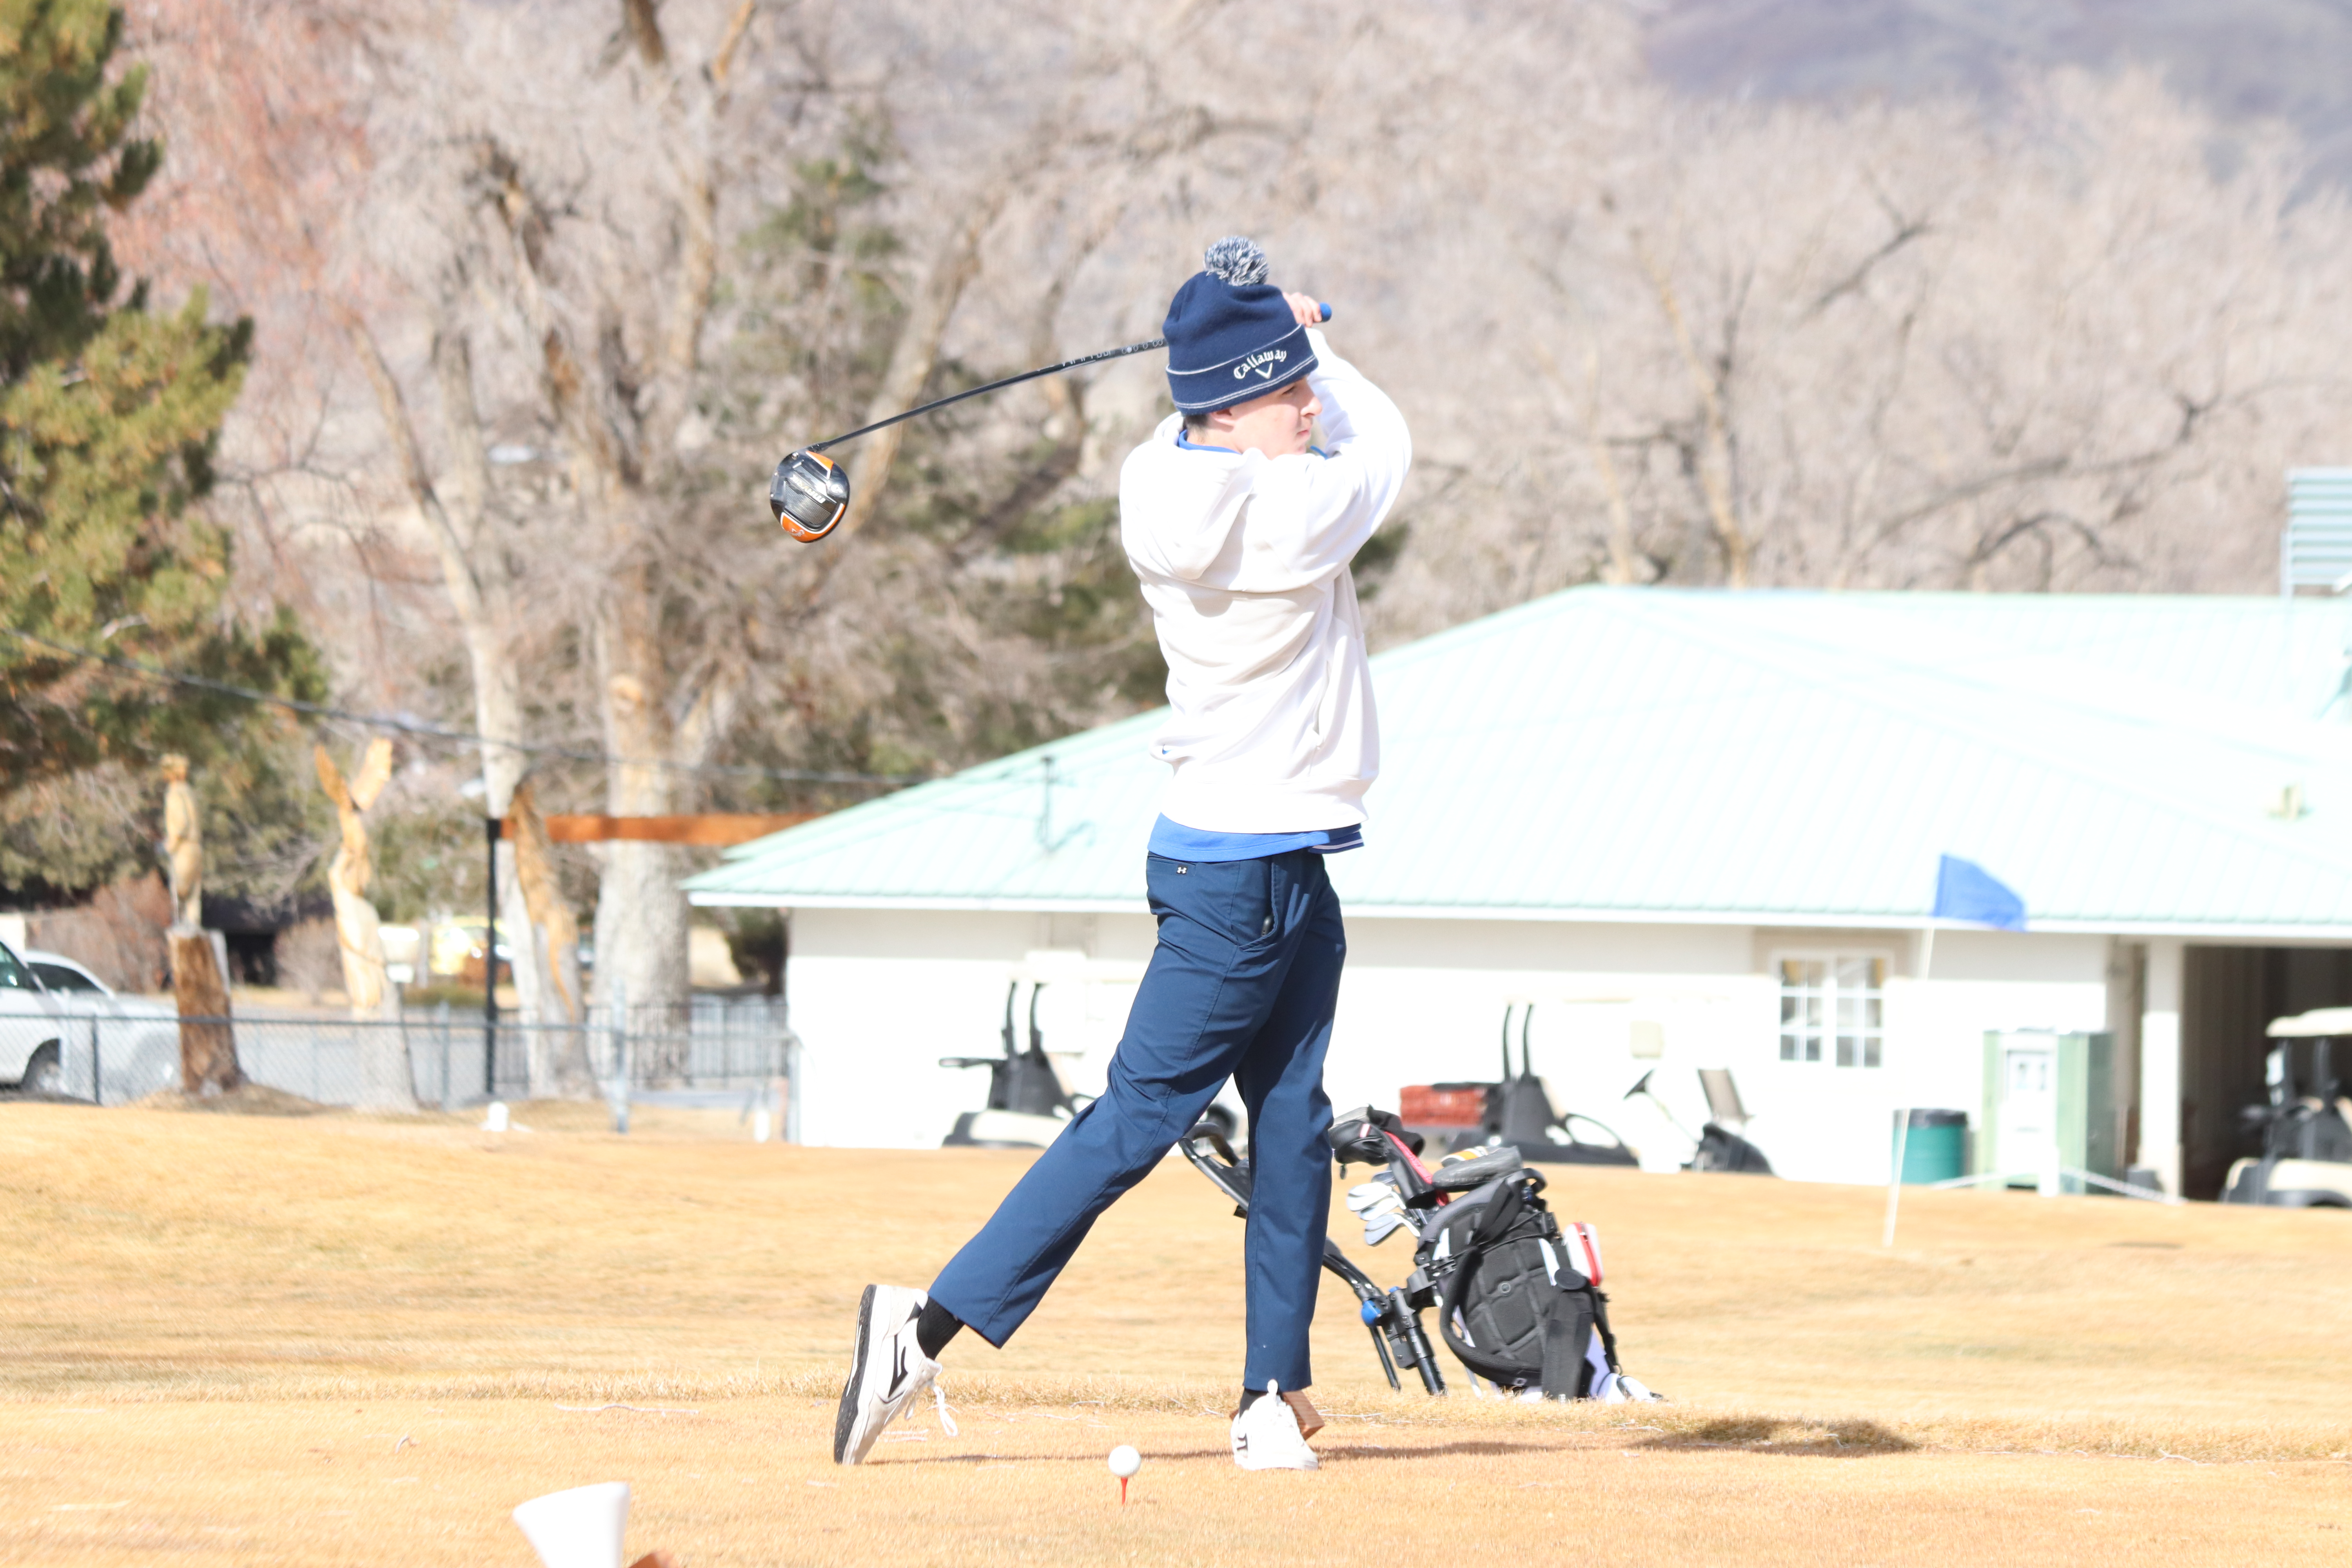 Boy’s Golf hopes to get on the course soon